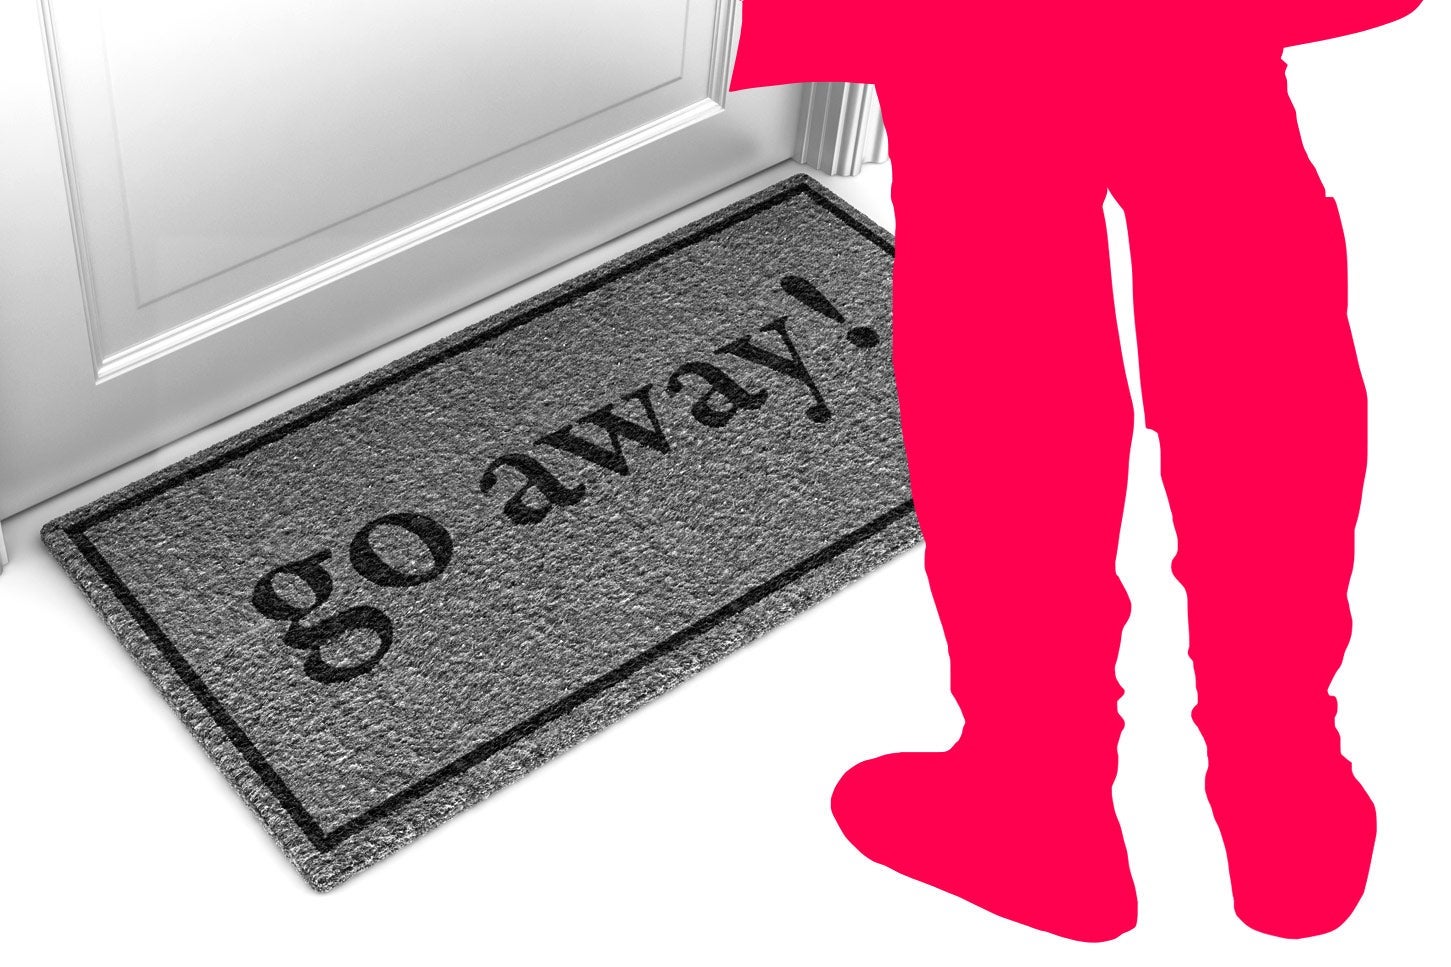 A doormat that says "go away!" lies before an entryway.